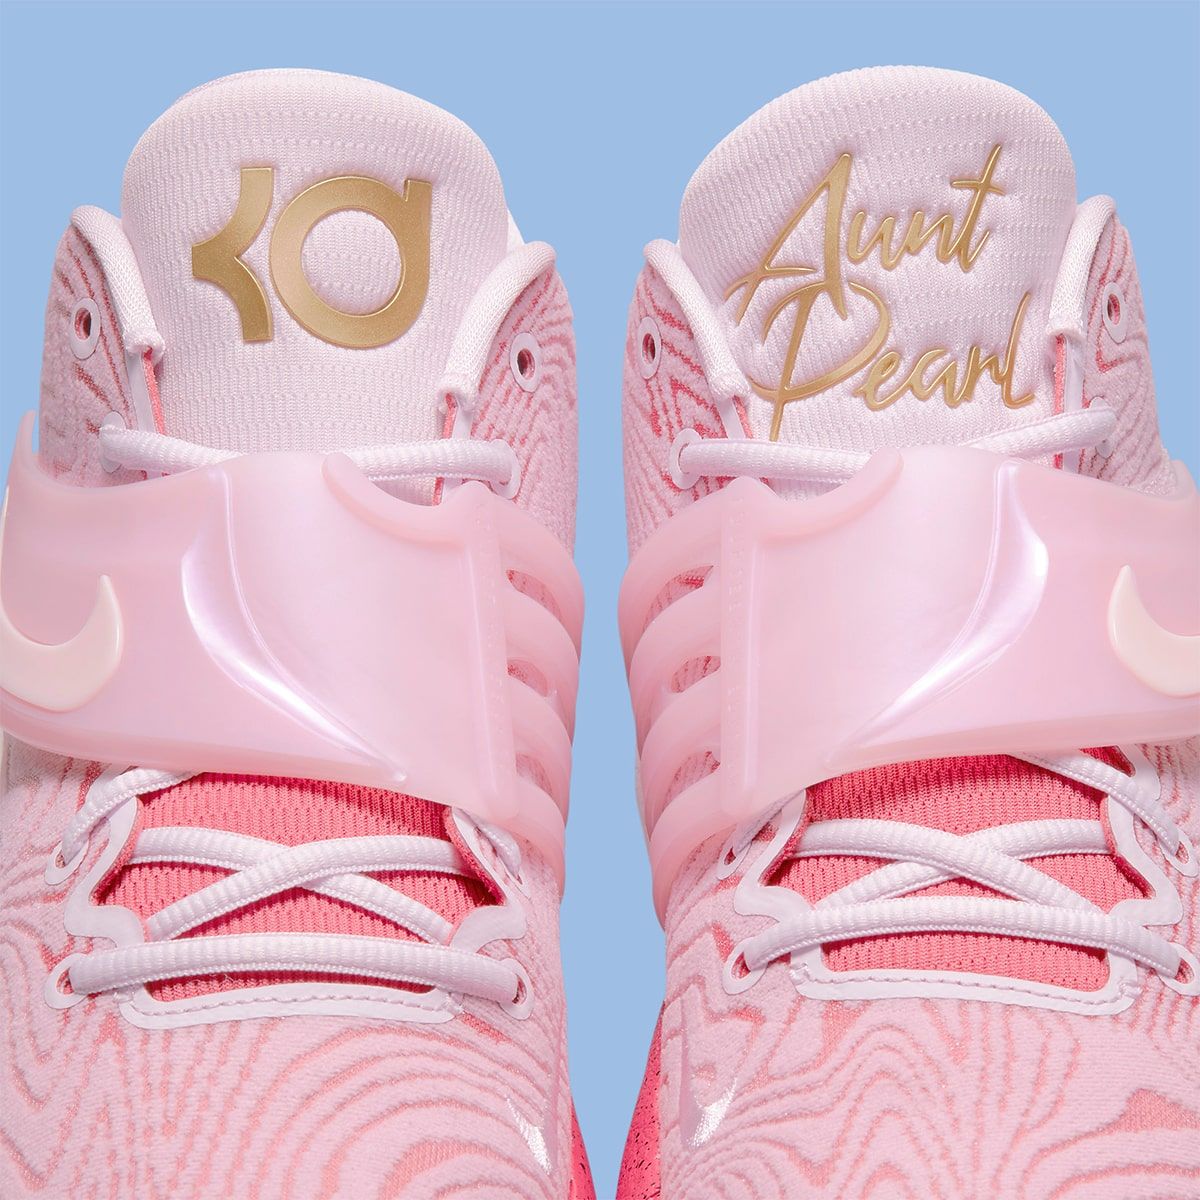 Available kd 3 aunt pearl Now // Nike KD 14 “Aunt Pearl” | HOUSE OF HEAT